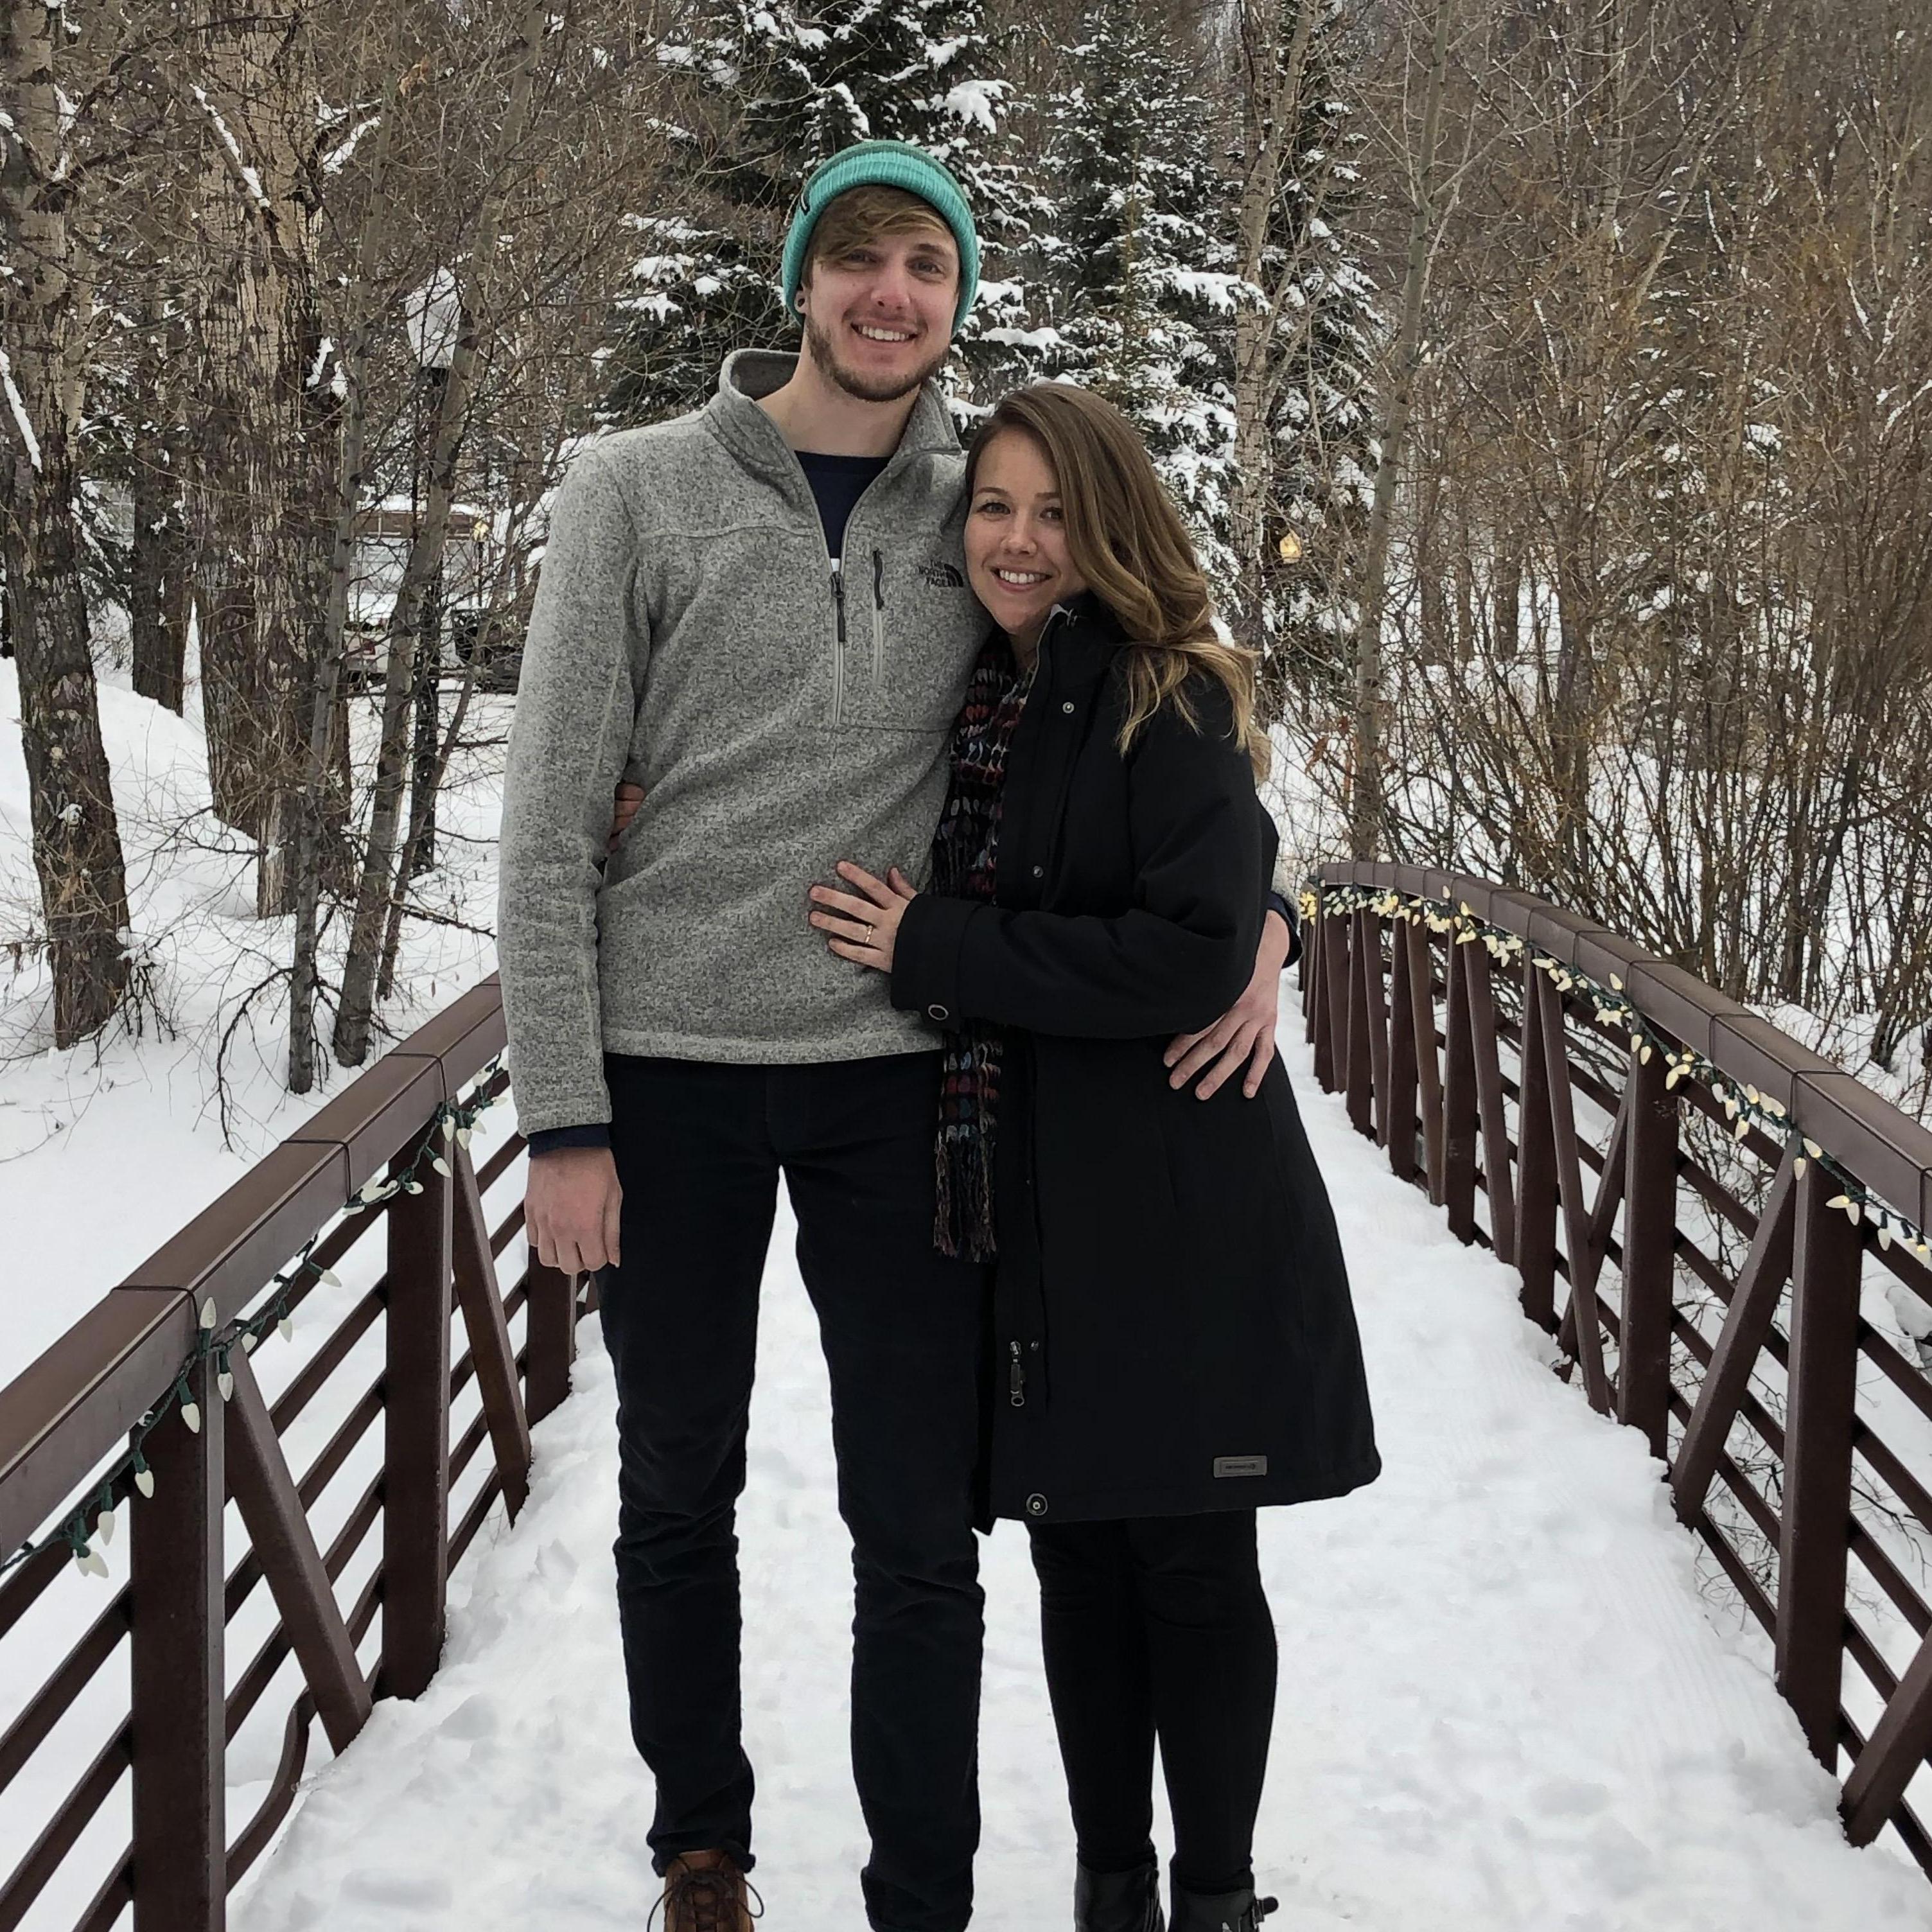 After our engagement in Telluride, CO